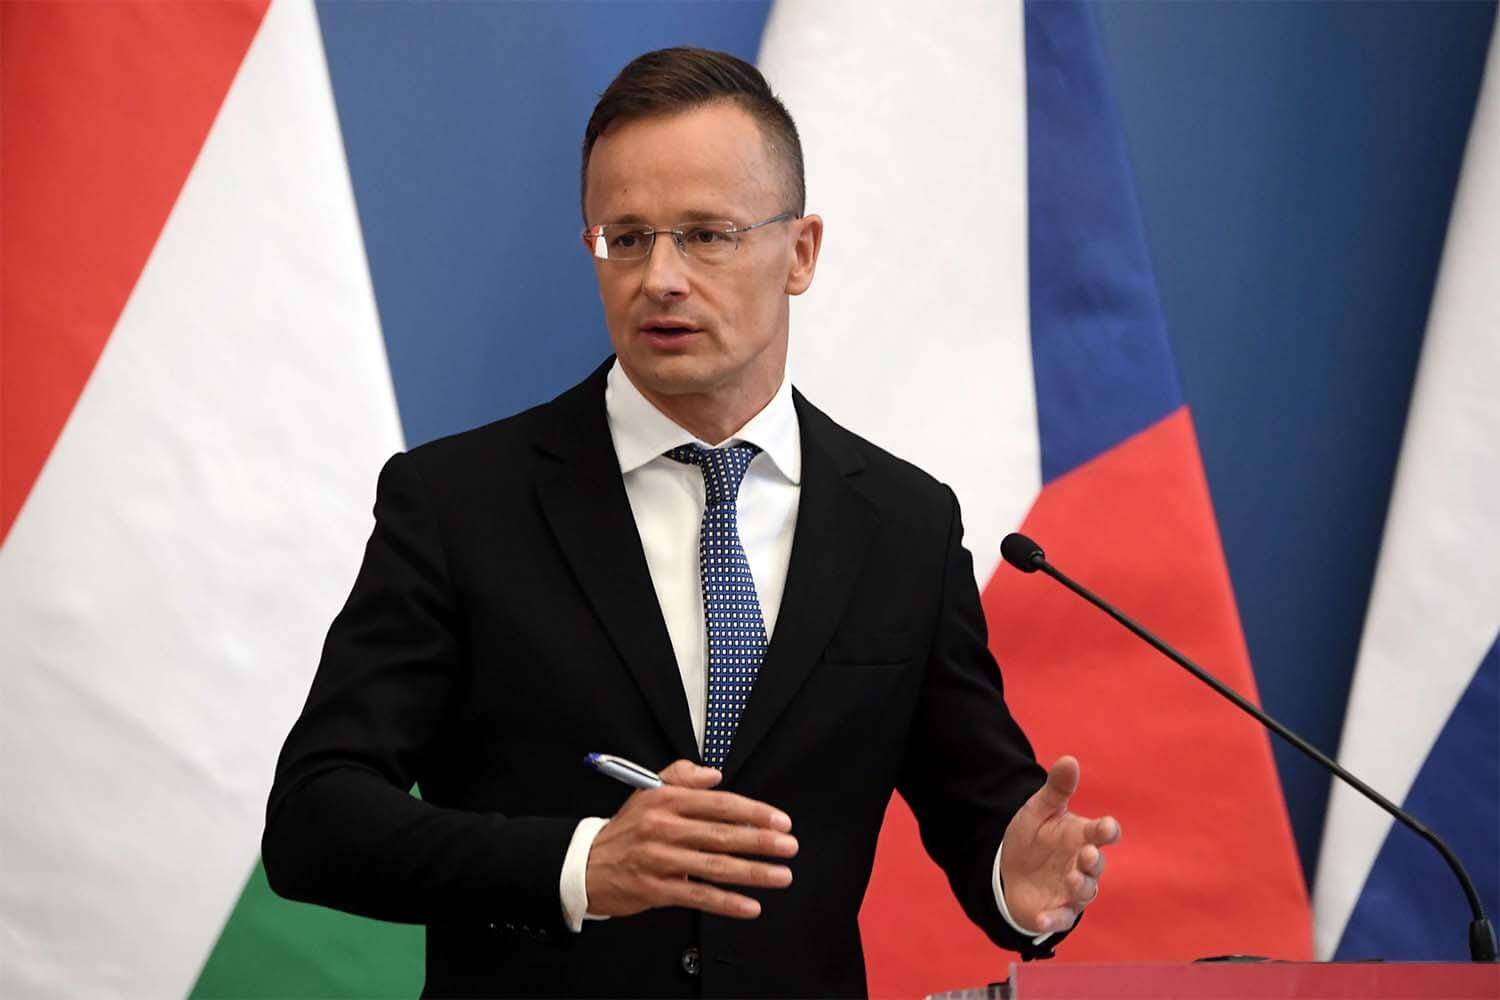 Hungary Blocks EU Joint Resolution on Israel-Palestine Conflict